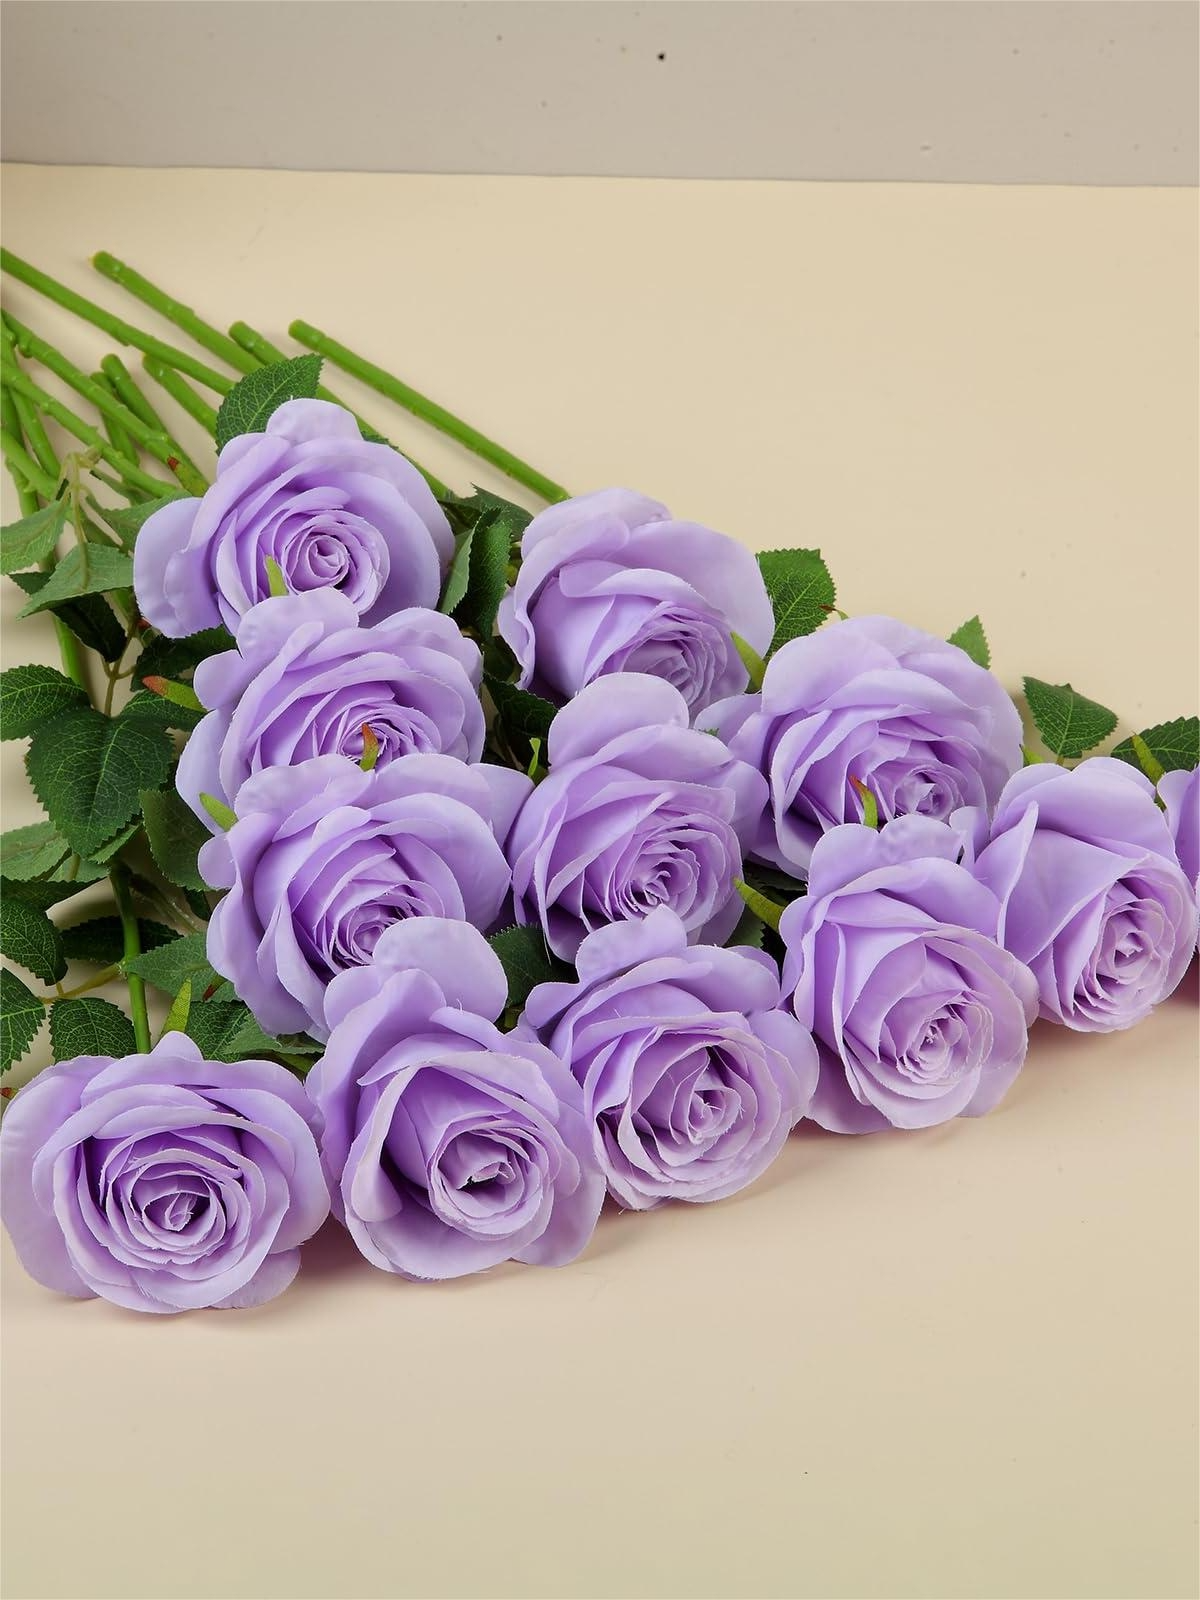 Lilac Artificial Rose Flowers With Long Stems Wedding Bouquet Centerpieces Decorations HH8038